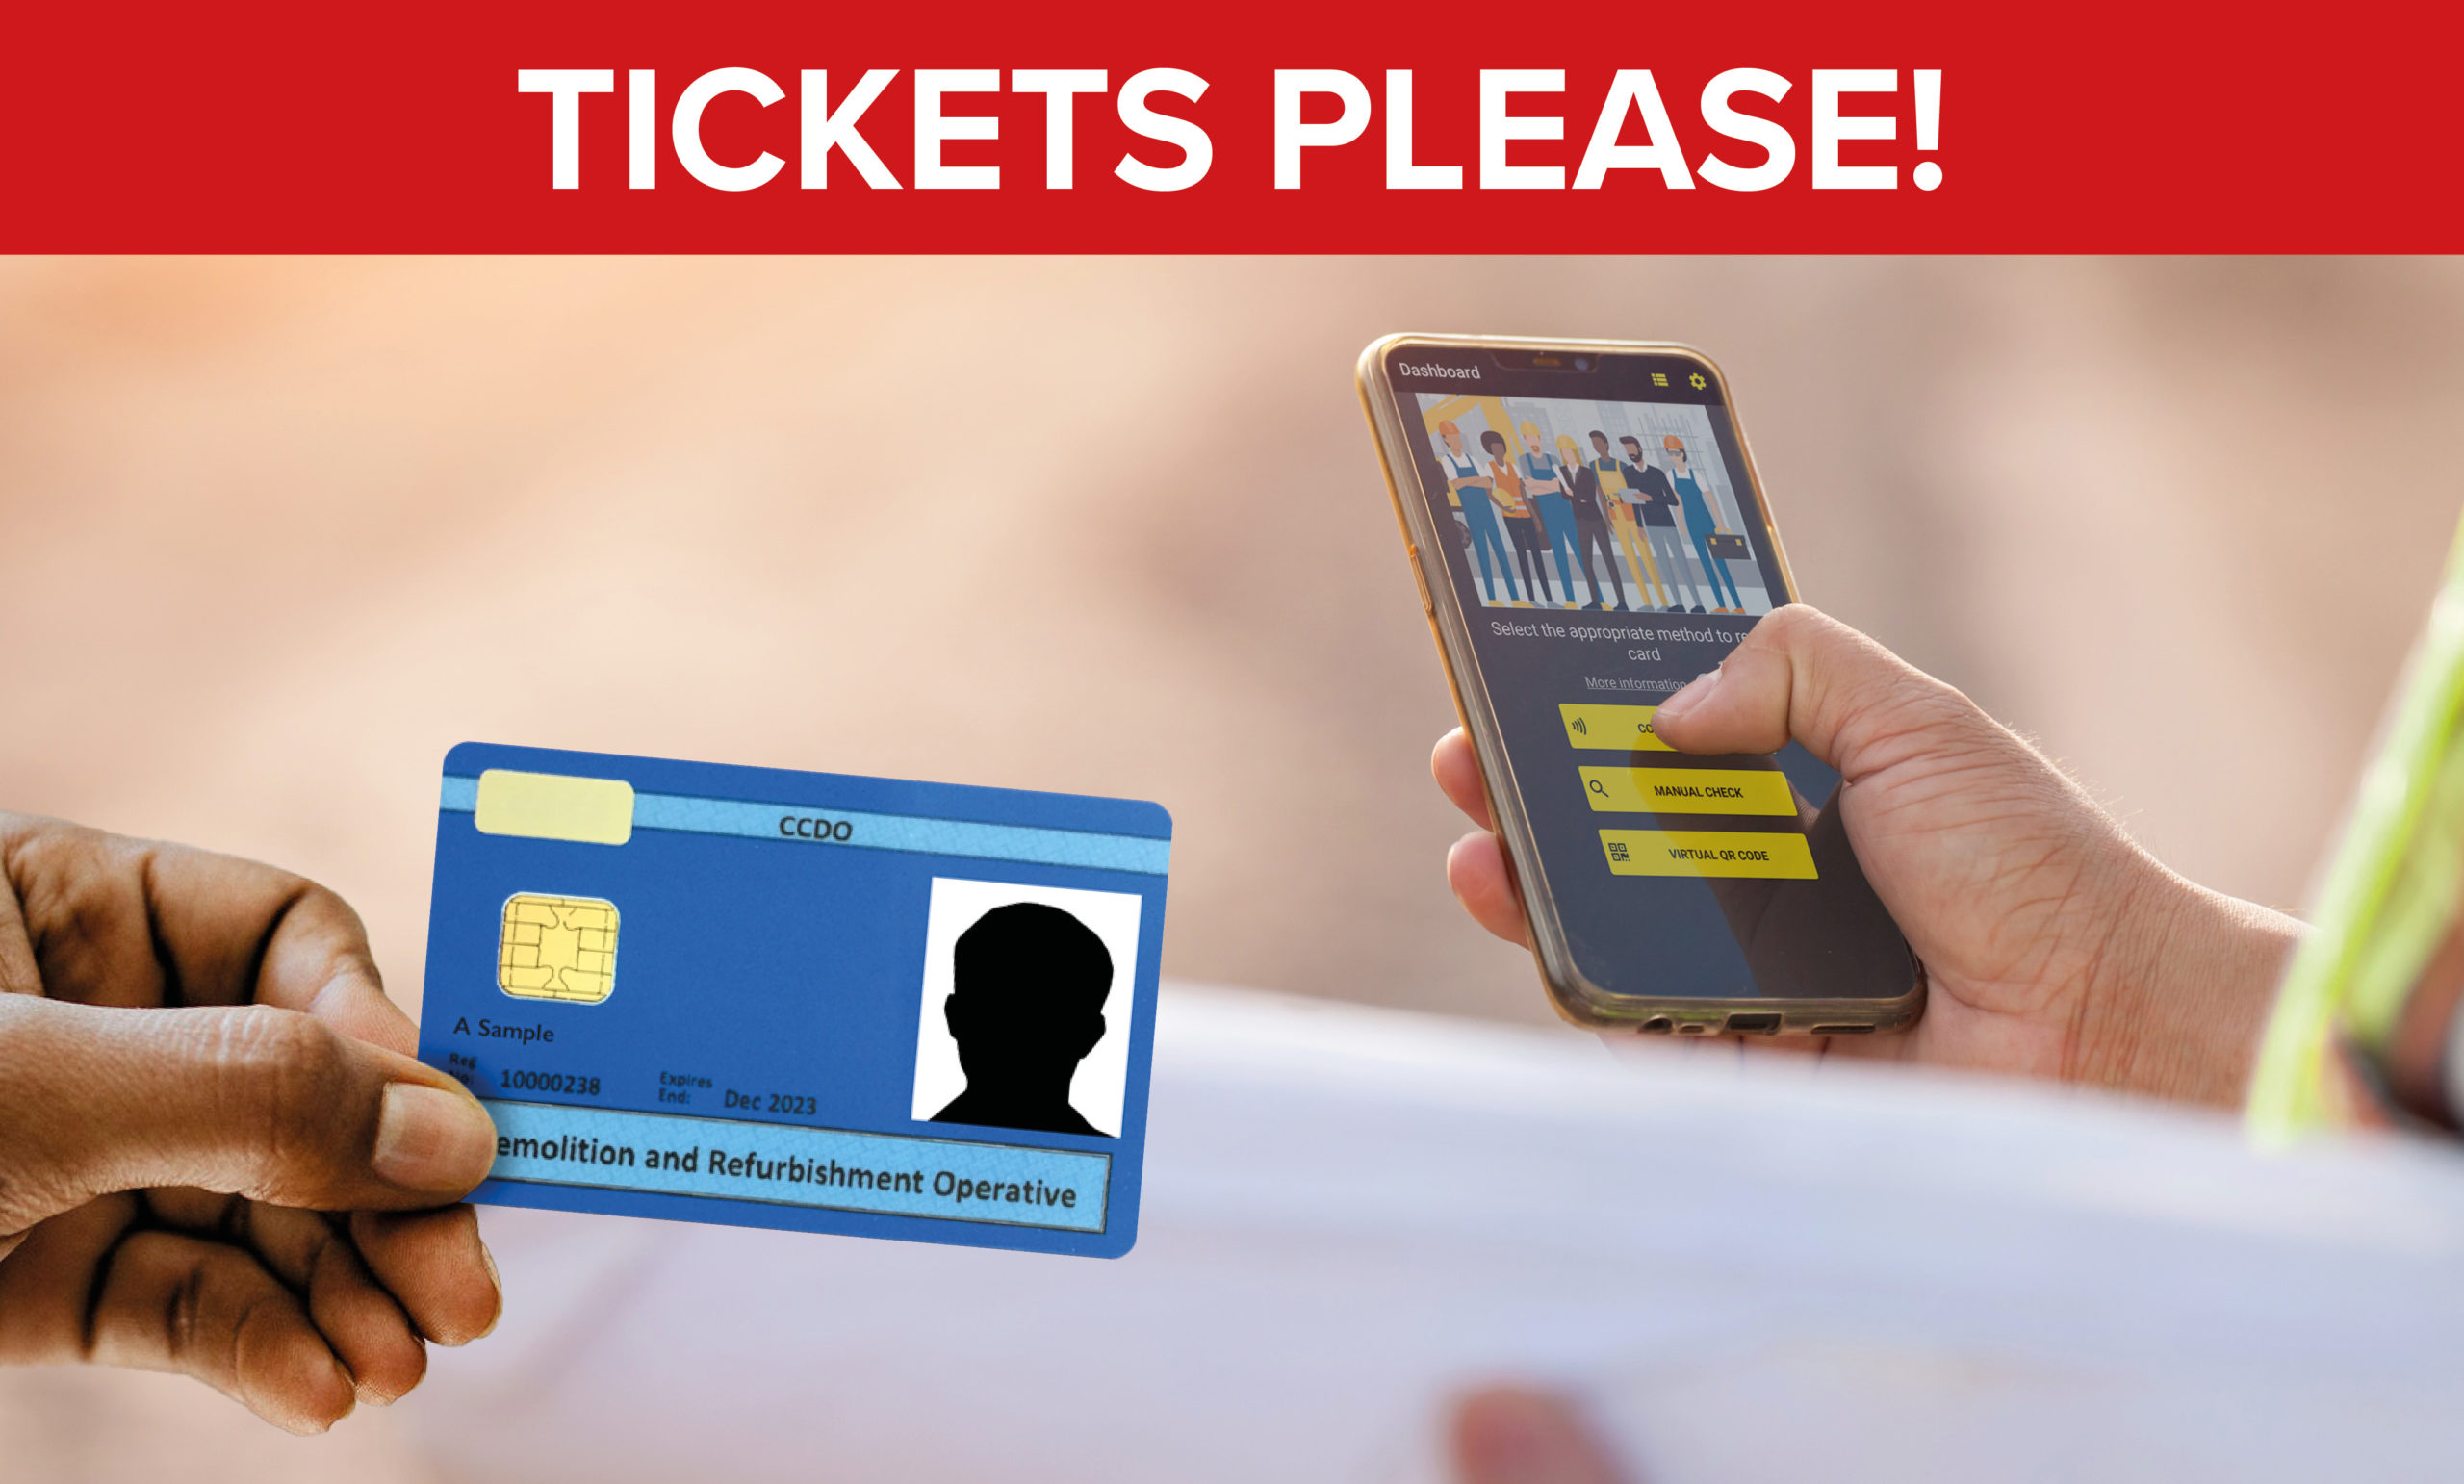 TICKETS PLEASE! Check your cards with Go Smart